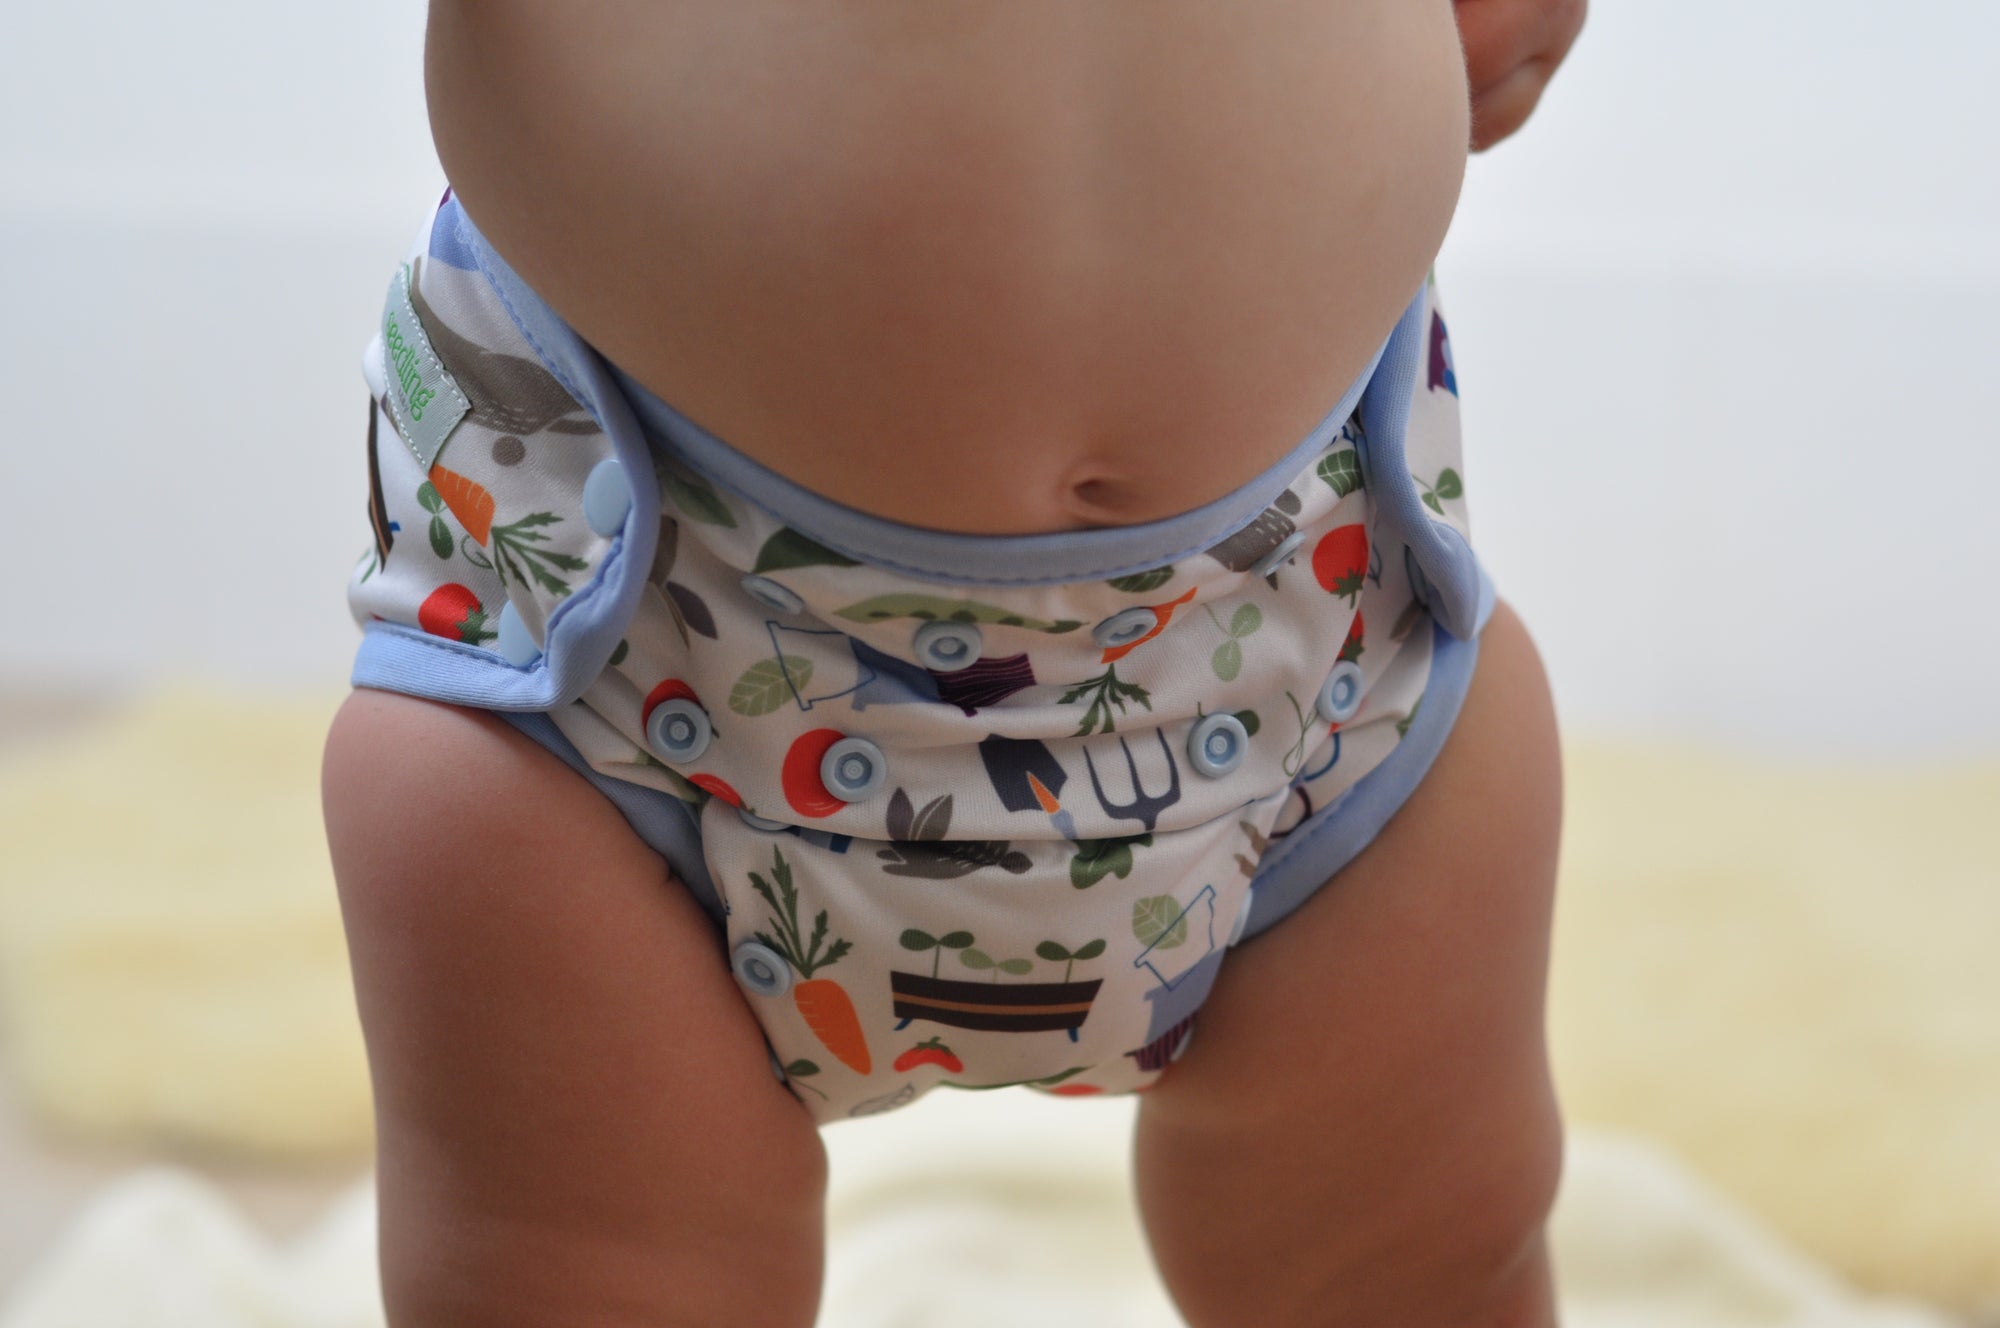 Winter Cloth Nappying Tips: The Complete Guide to Using Reusable Nappies When it's Cold